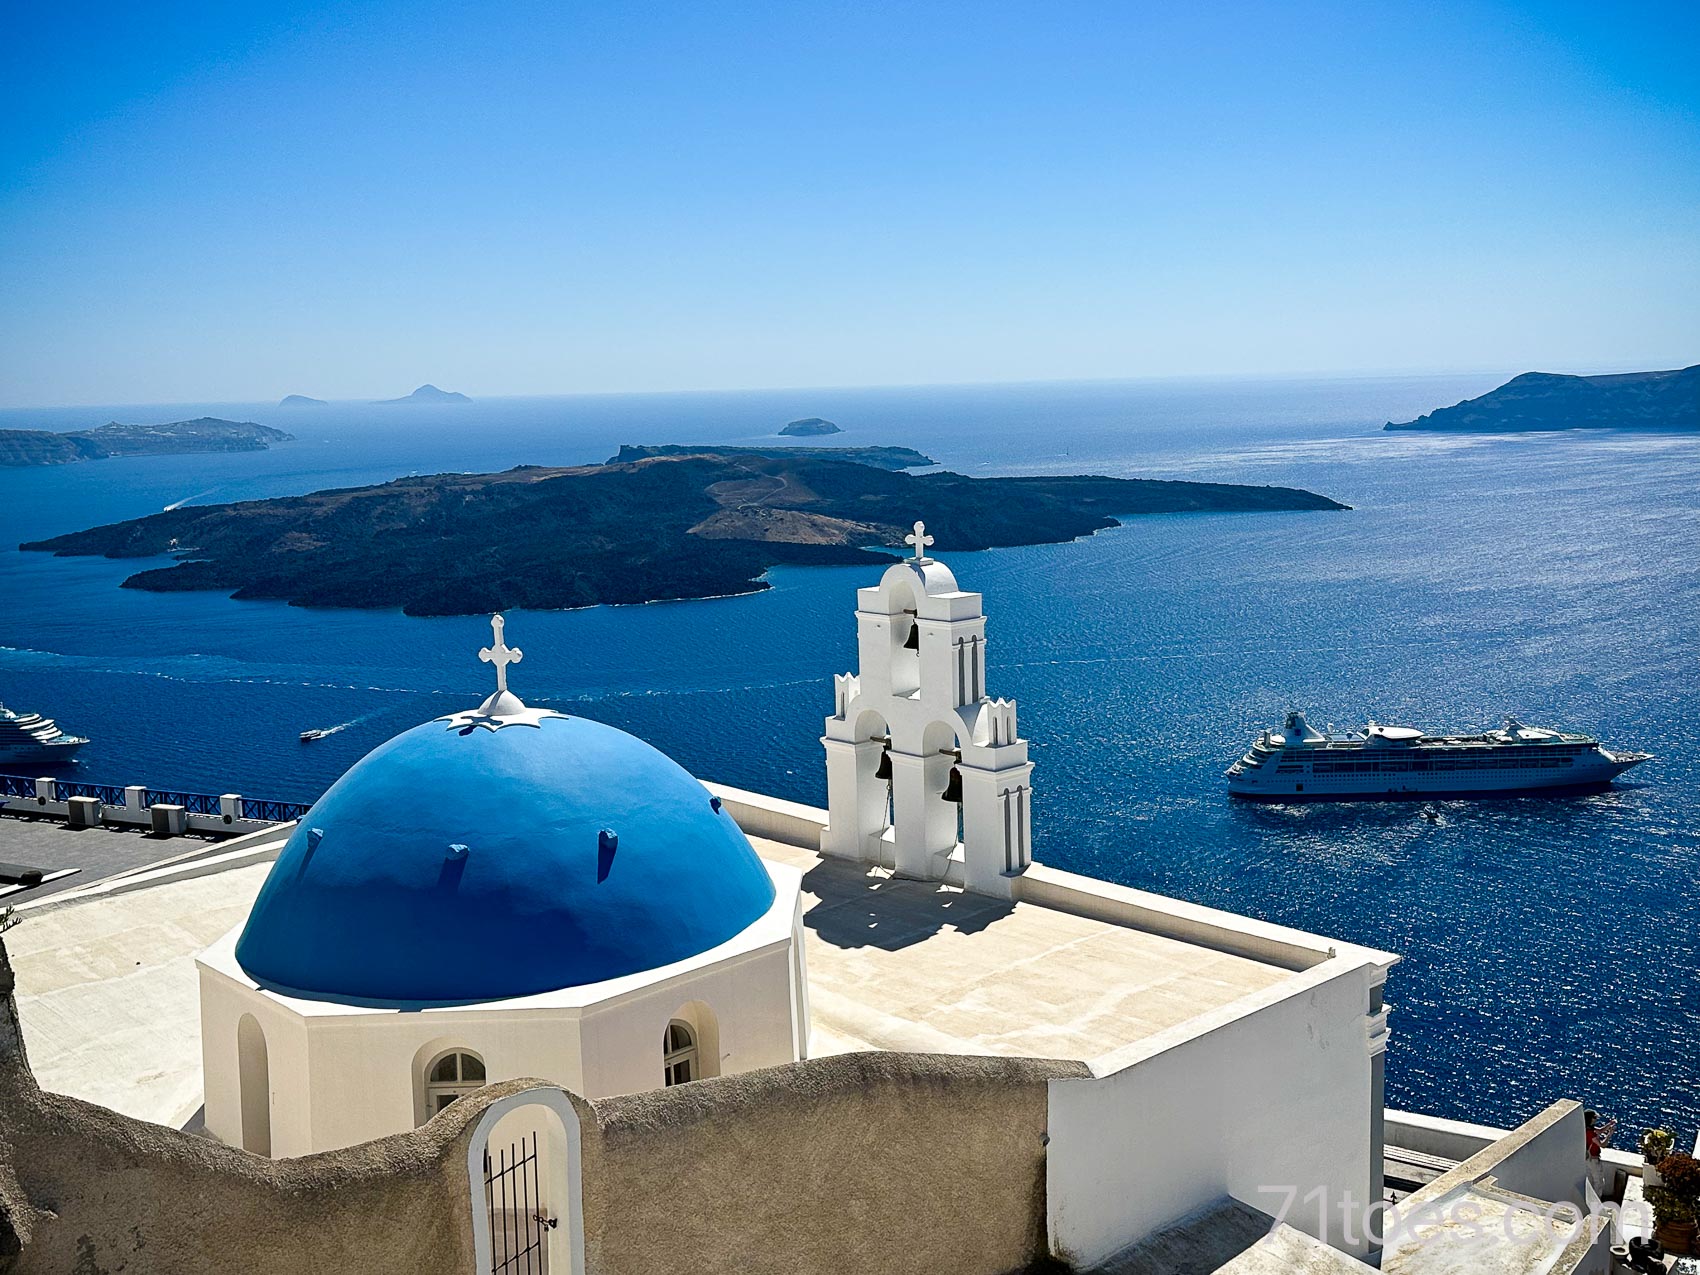 the best way to see those magnificent Greek Islands